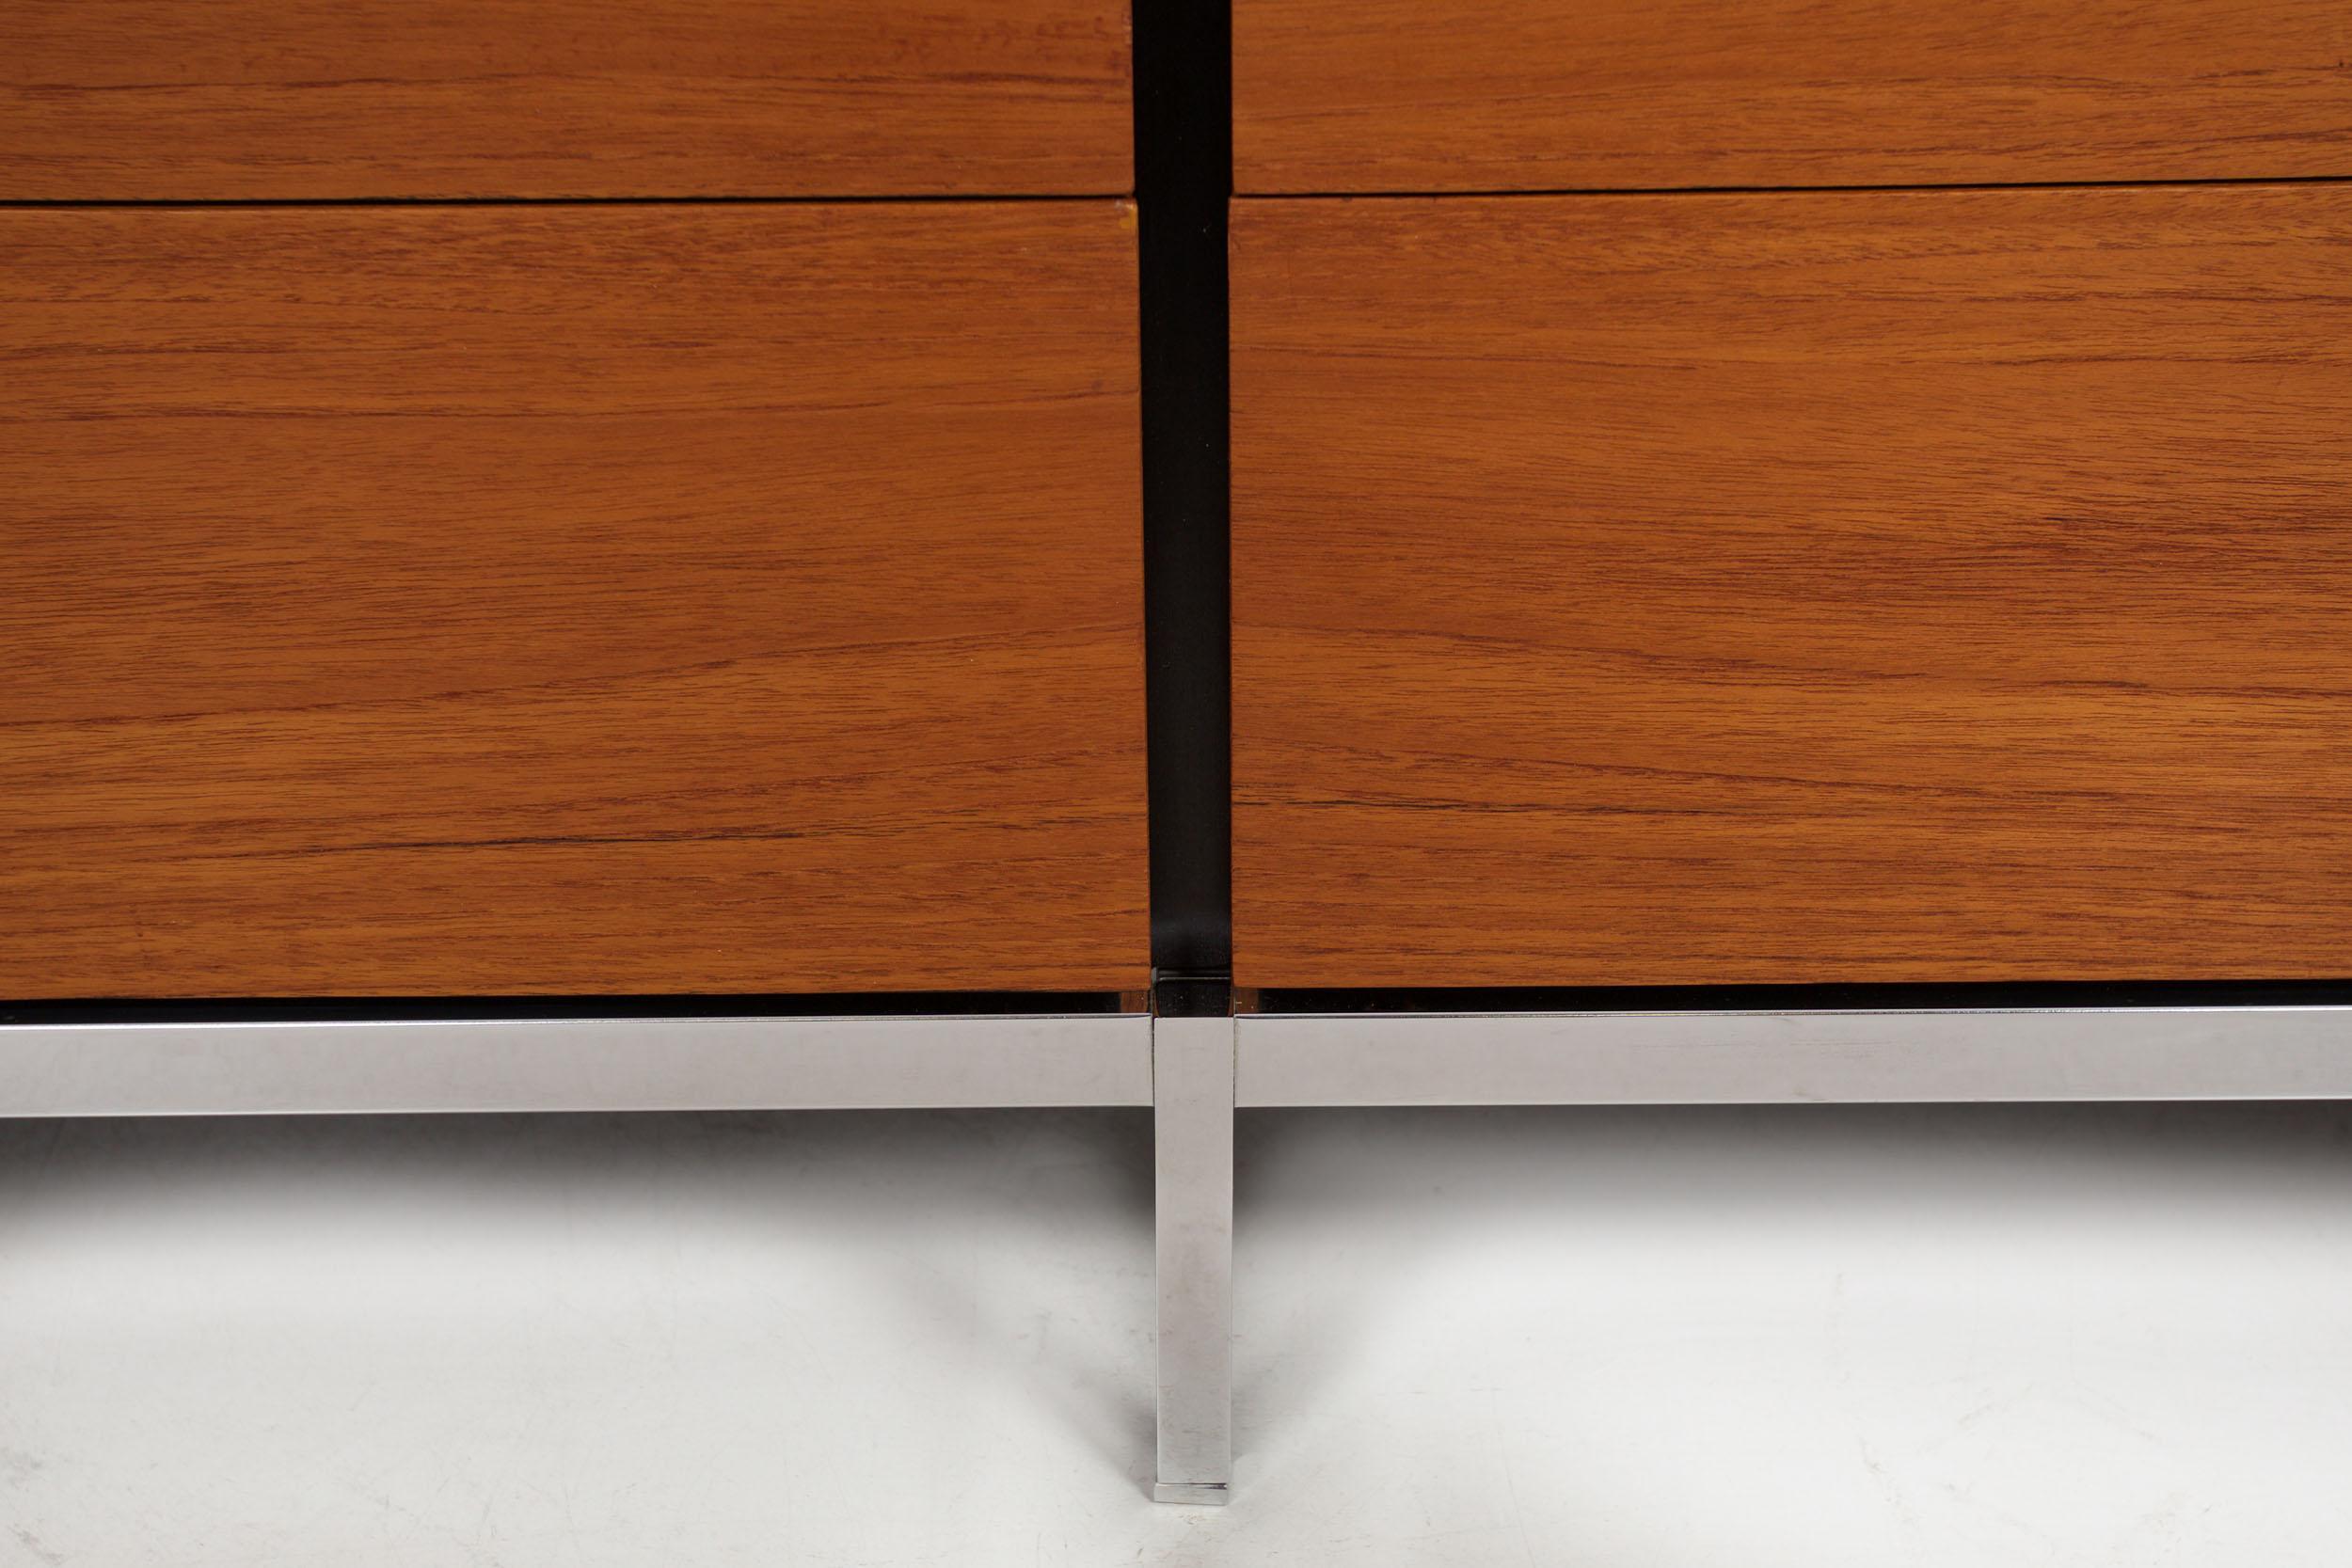 Knoll Mid-Century Modern Teak and Chrome Double Chest Credenza, circa 1970 For Sale 13